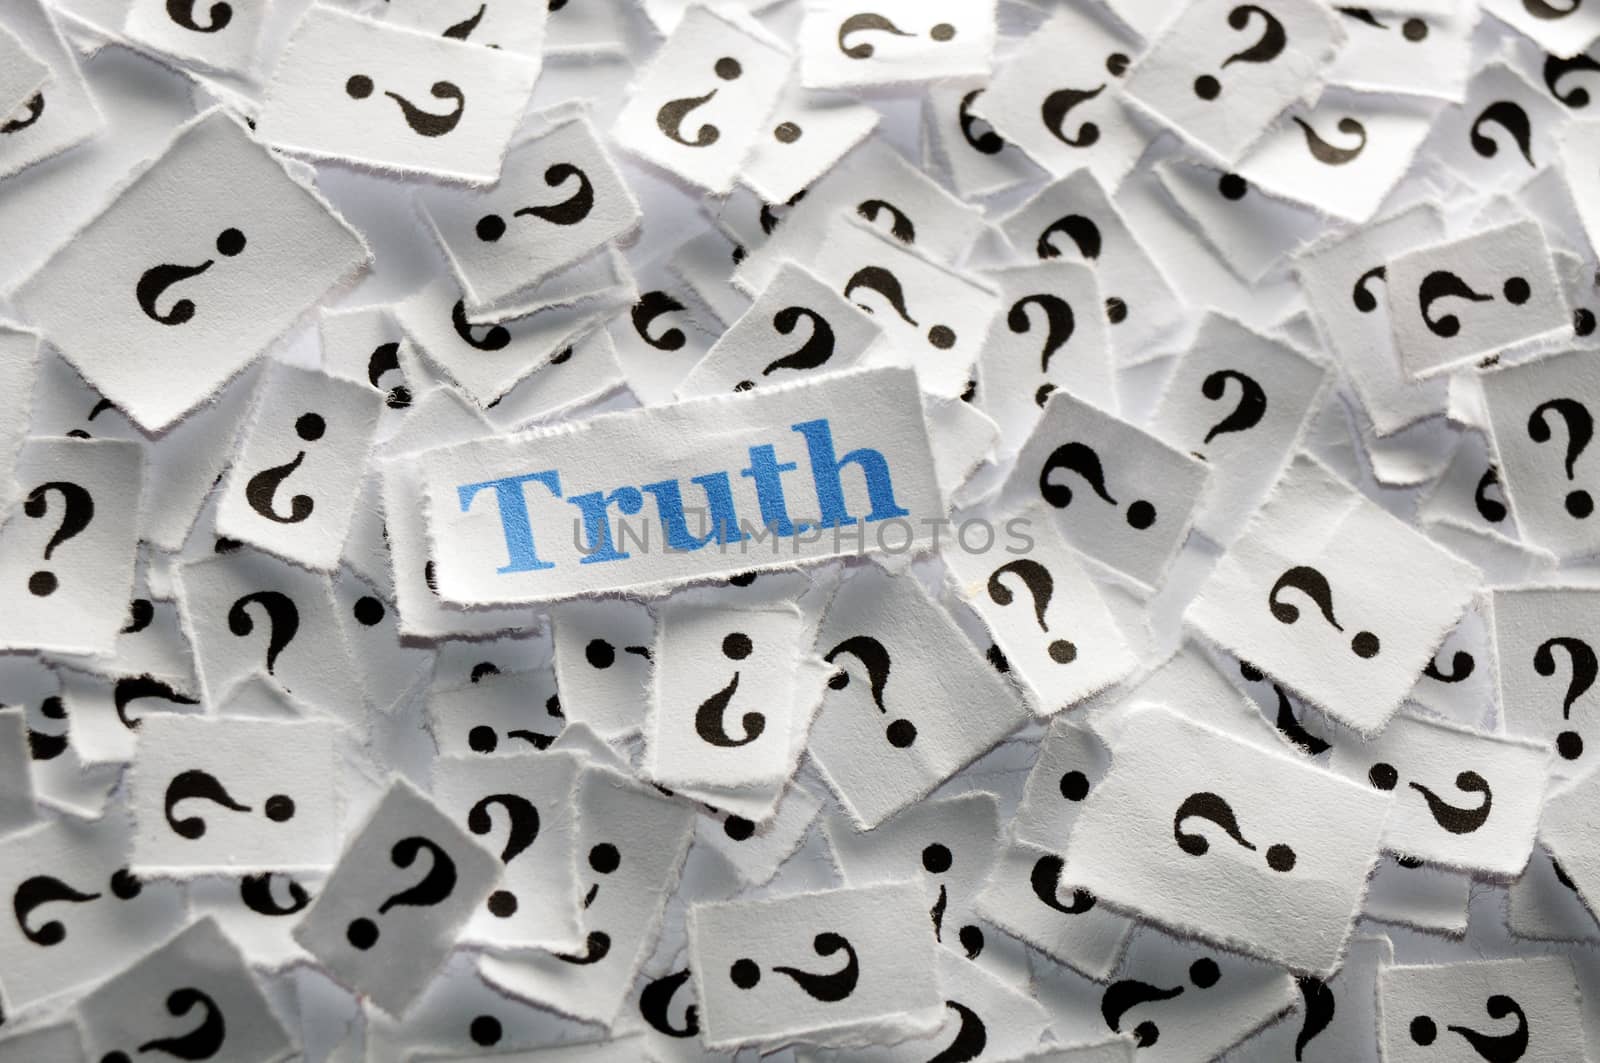 truth on question marks on white papers -hard light